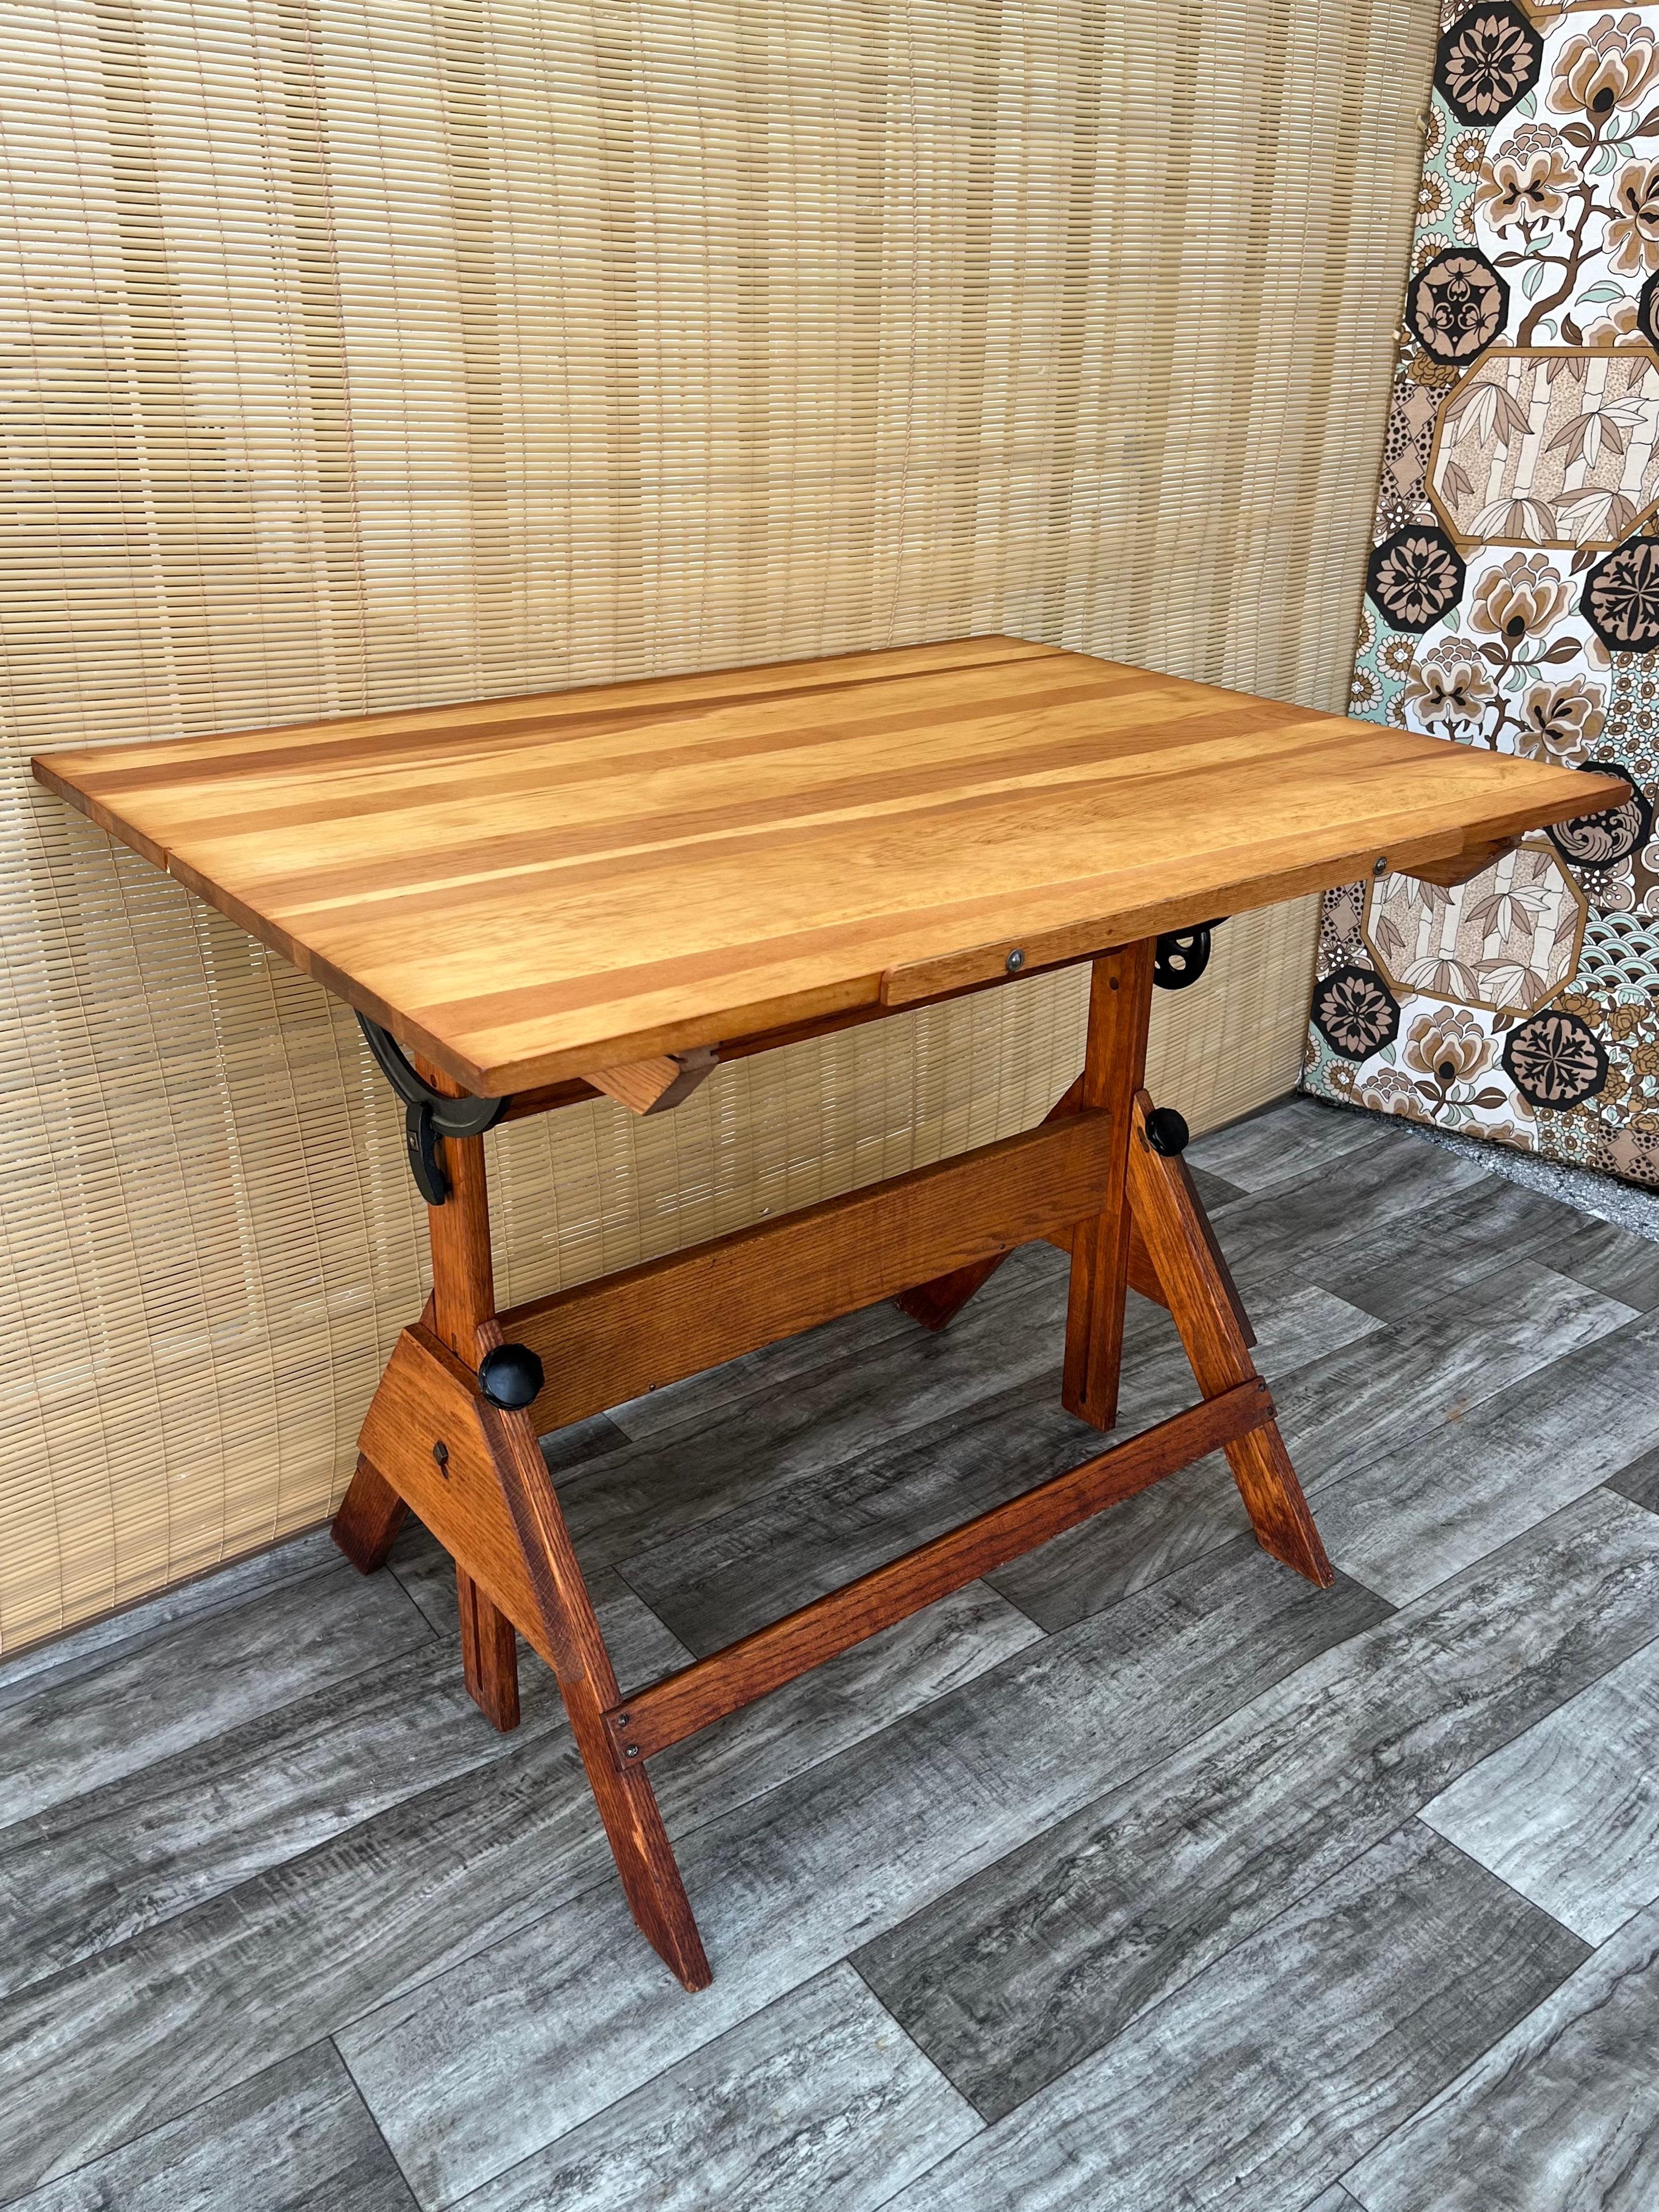 Vintage adjustable height Industrial drafting table. circa 1960s.
Features and adjustable height and tilting drawing / working surface, cast iron hardware, solid wood frame, and a working surface with beautiful natural wood grain.
The top tilts on